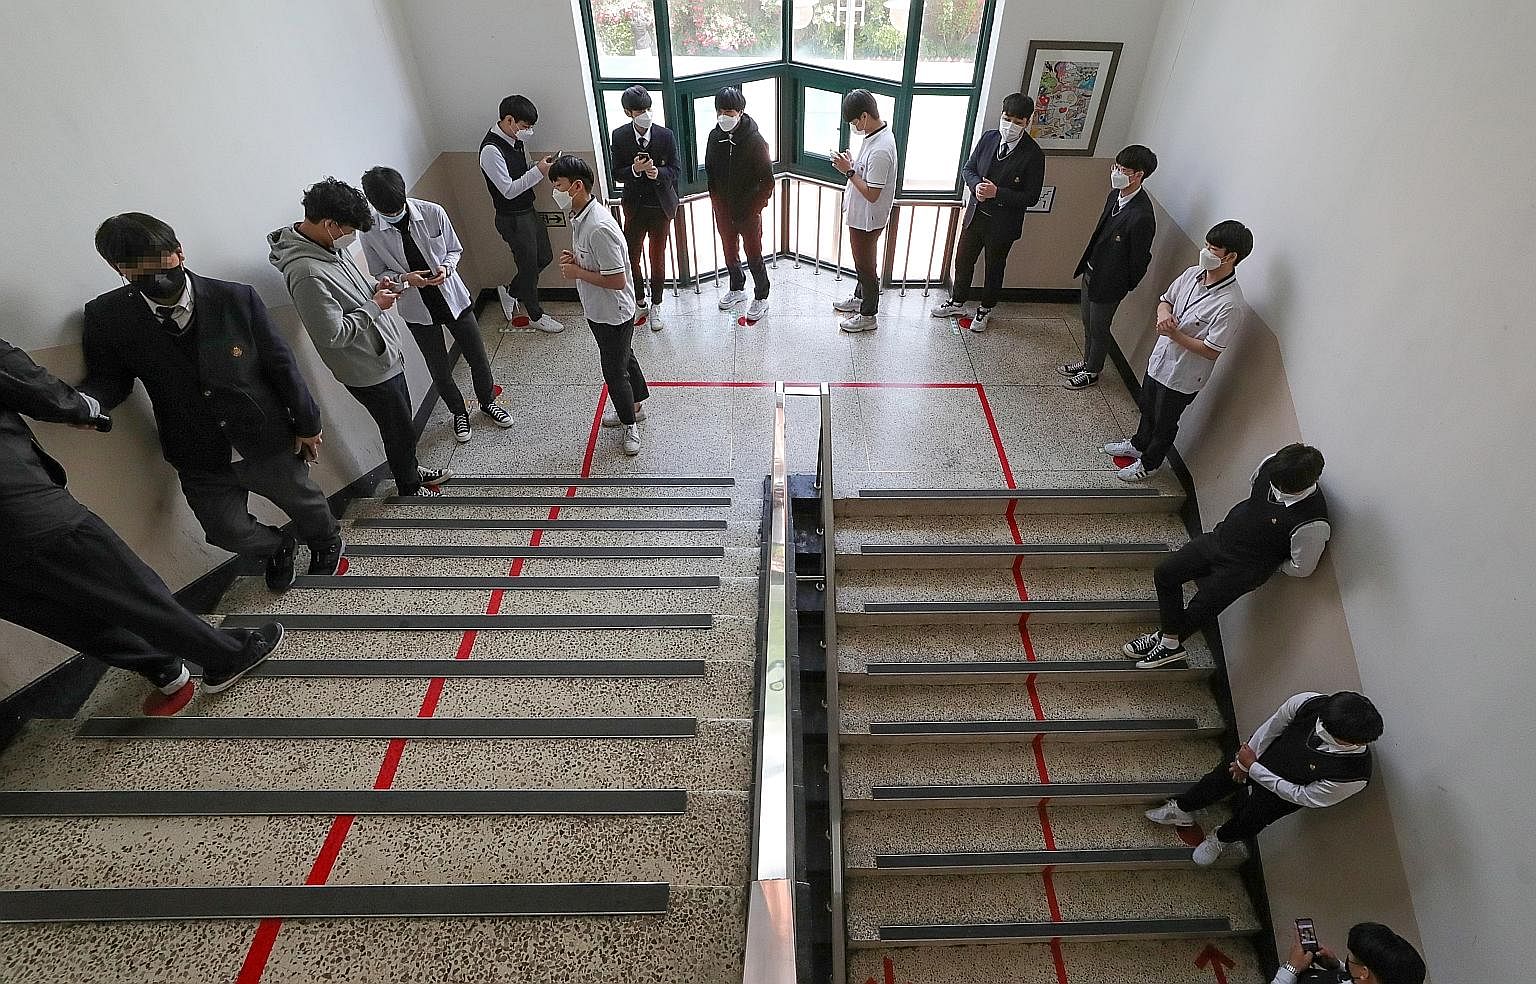 Above: High school seniors sitting behind protective shields as a preventative measure against the coronavirus in a classroom in Daejeon, South Korea, yesterday. Below: Some seniors standing in line to enter the cafeteria as high schools nationwide r